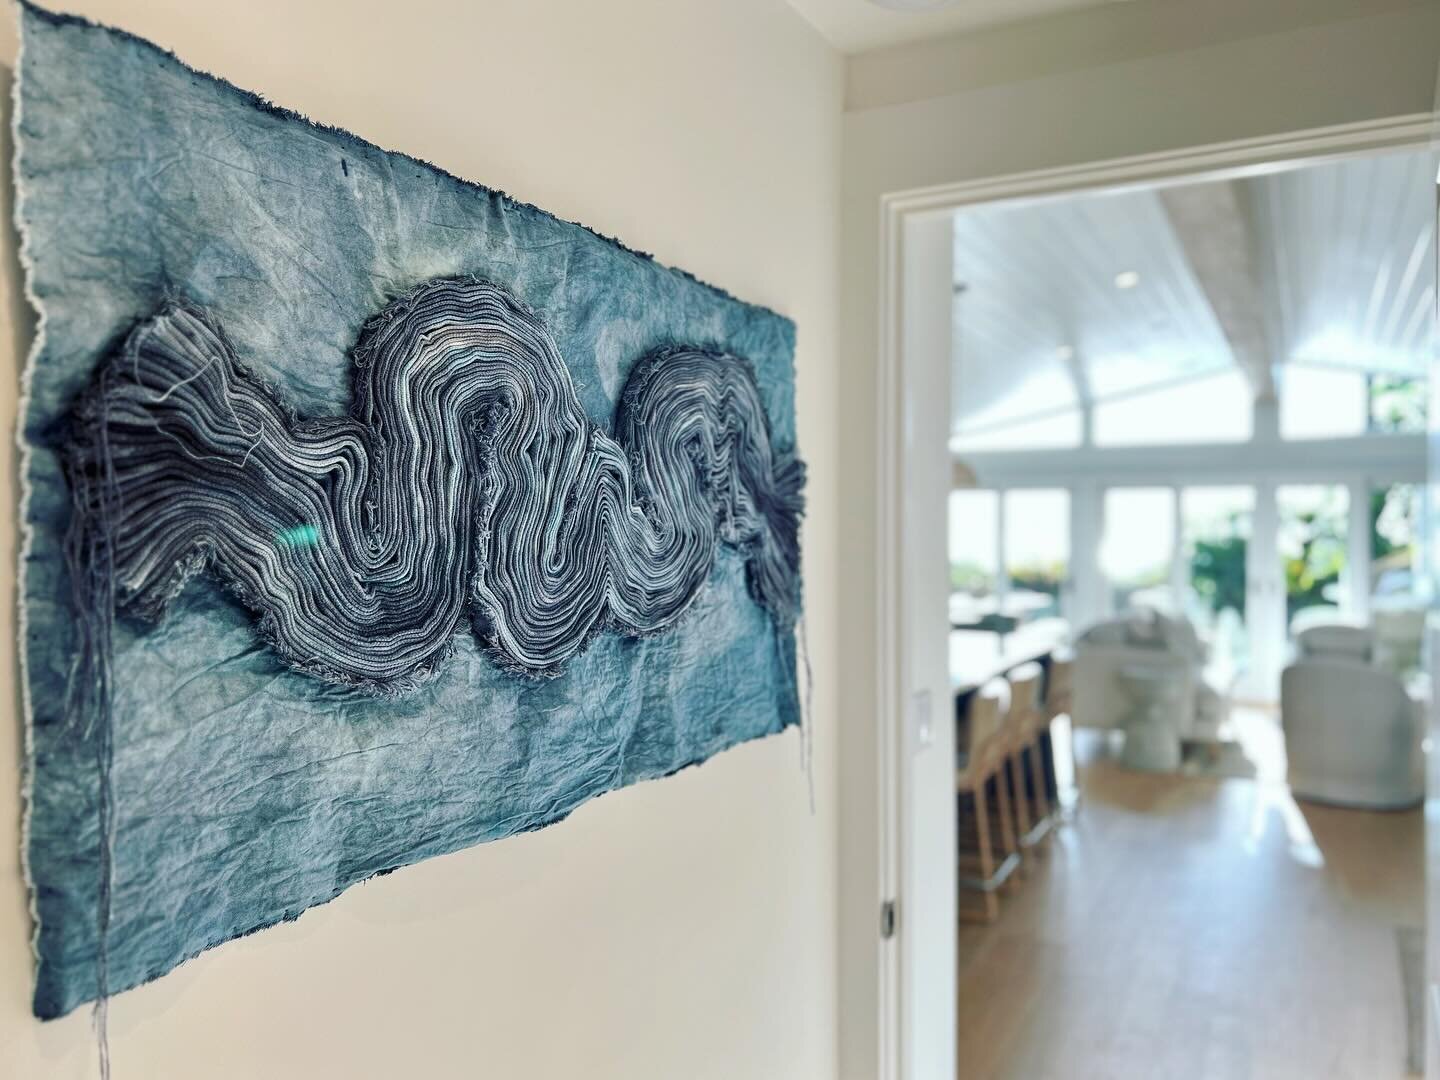 Out Of The Blue Collection 2022
Infinite Tide
&bull;
So Grateful to all my lovely clients who find and love my work. Who trust me to create and install in their homes. It&rsquo;s been such a pleasure to work with so many amazing art collectors.  This